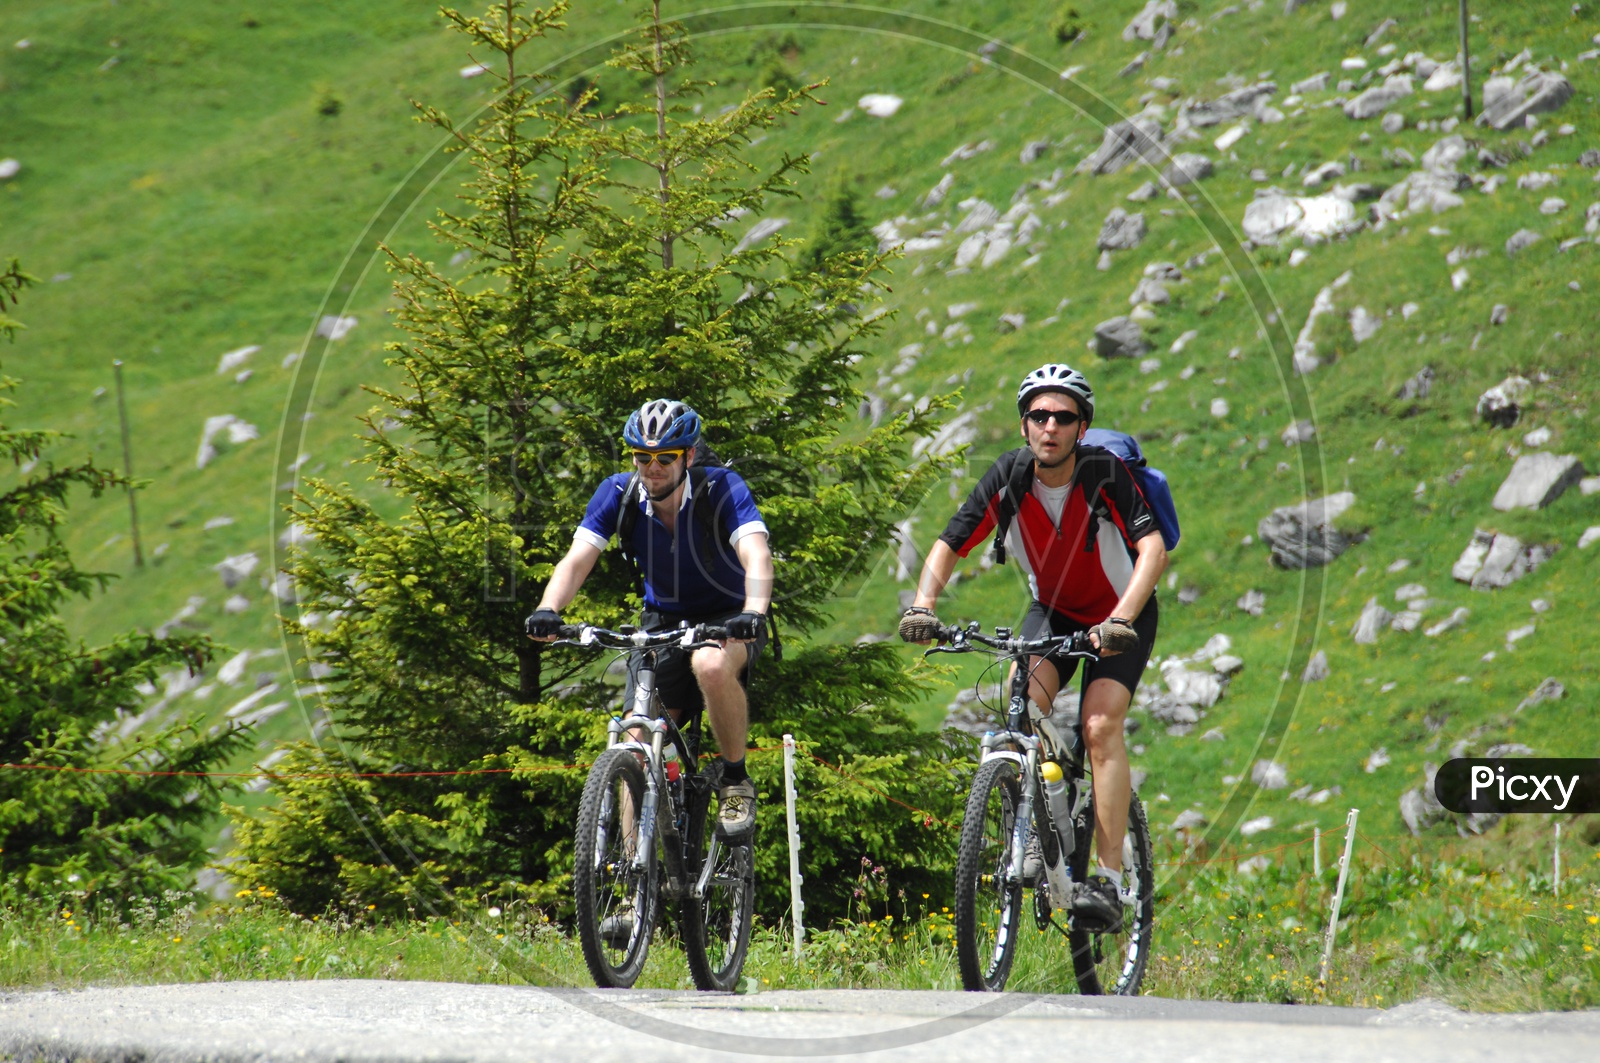 Cyclist Riding Cycles on Hill Station Pathways